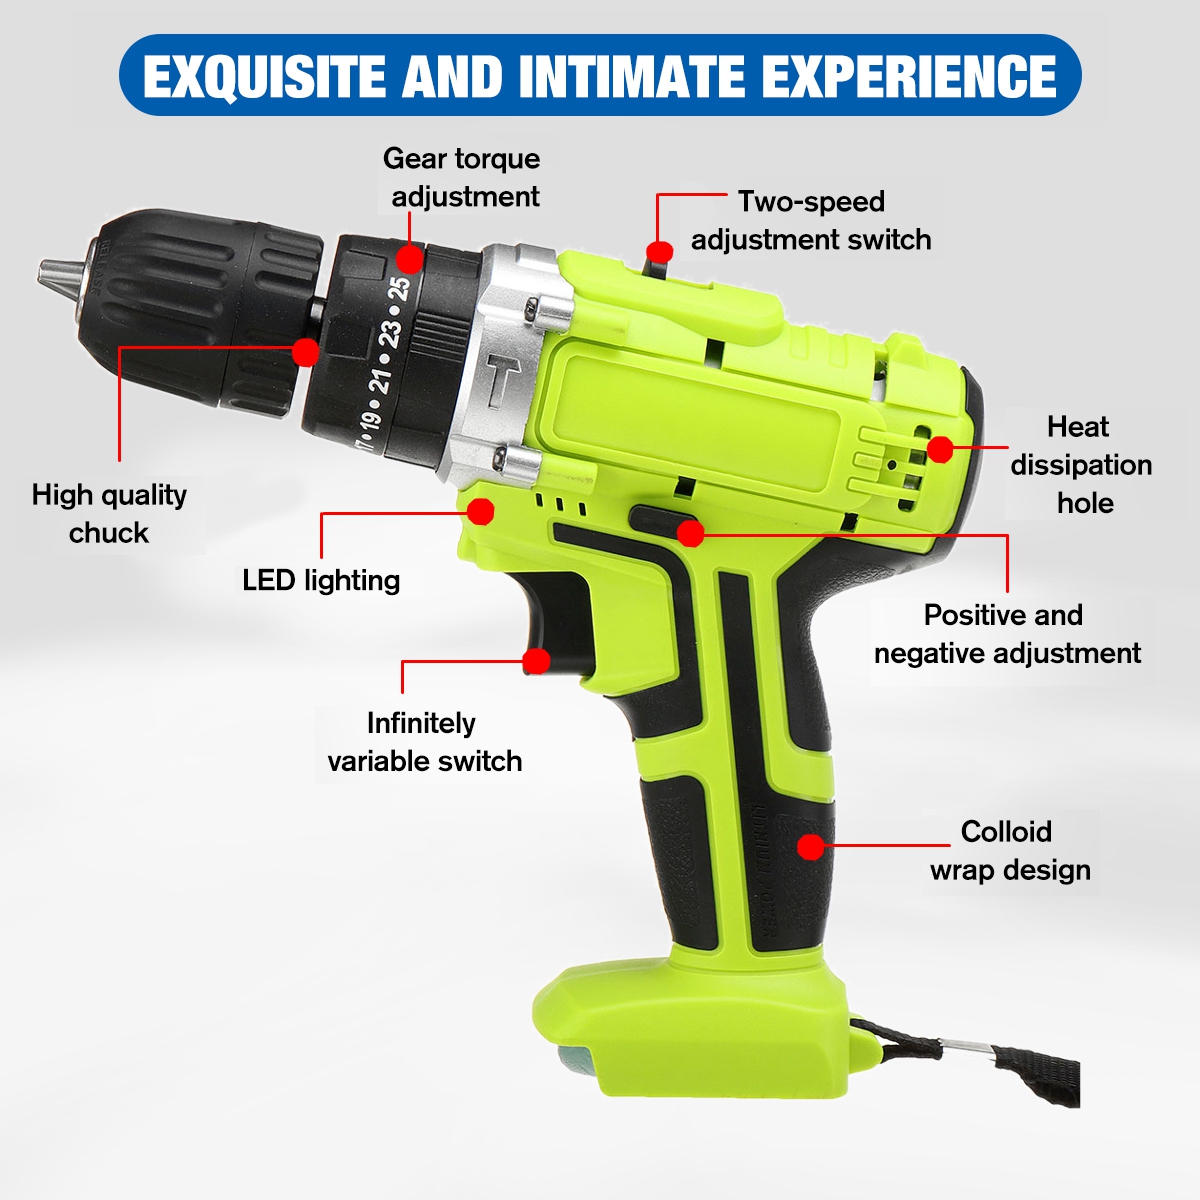 48VF-22800mAh-Cordless-Rechargable-3-In-1-Power-Drills-Impact-Electric-Drill-Driver-With-2Pcs-Batter-1877445-9